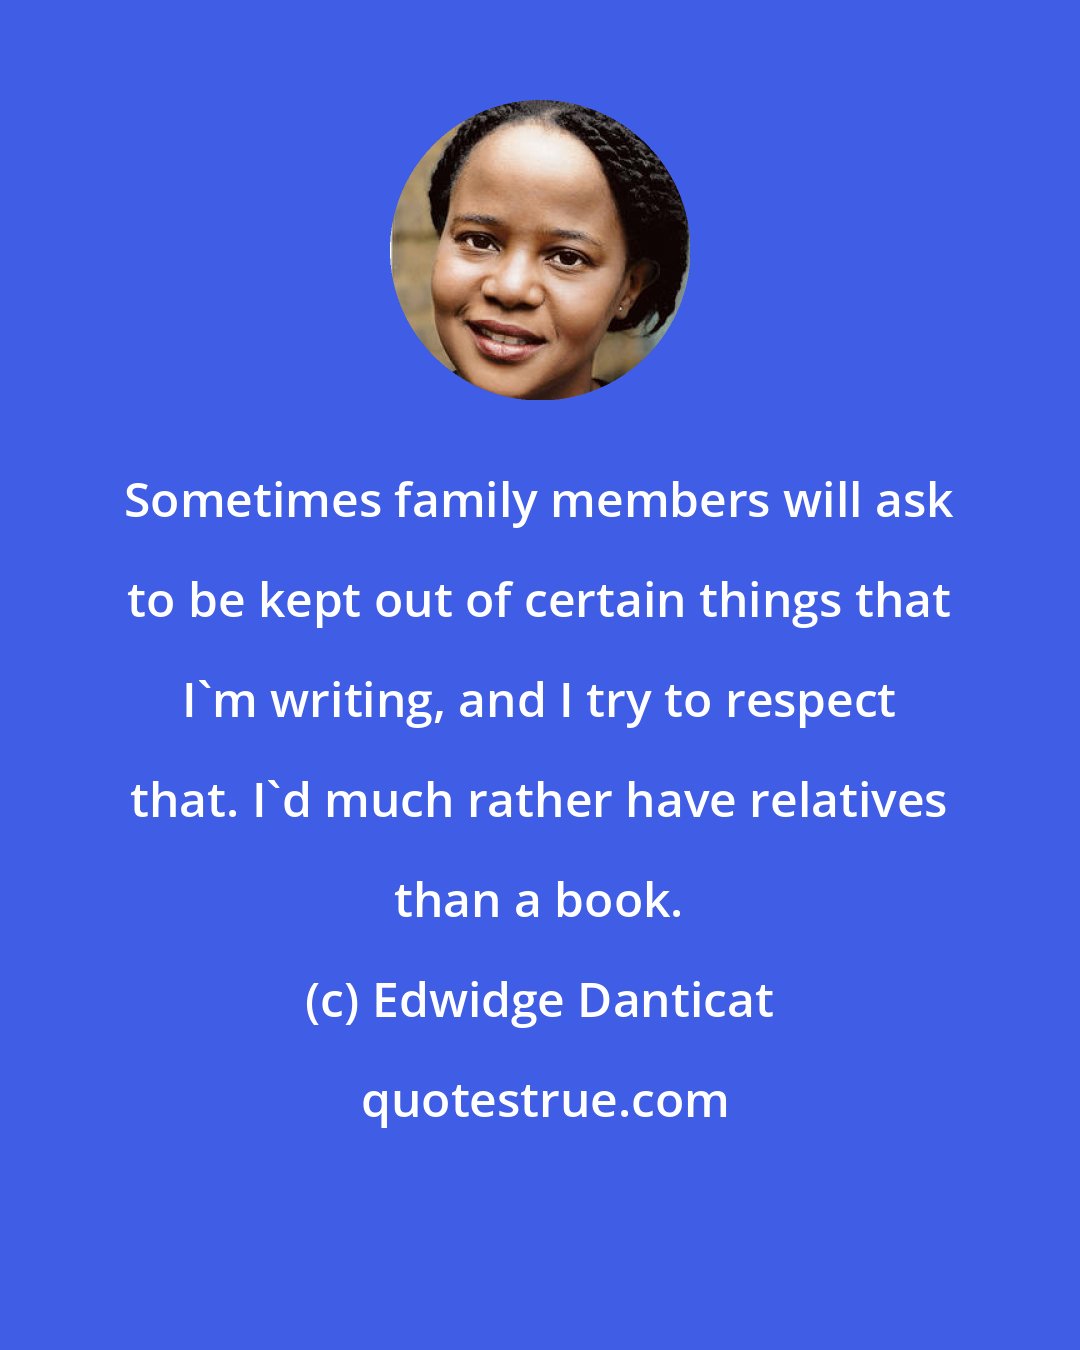 Edwidge Danticat: Sometimes family members will ask to be kept out of certain things that I'm writing, and I try to respect that. I'd much rather have relatives than a book.